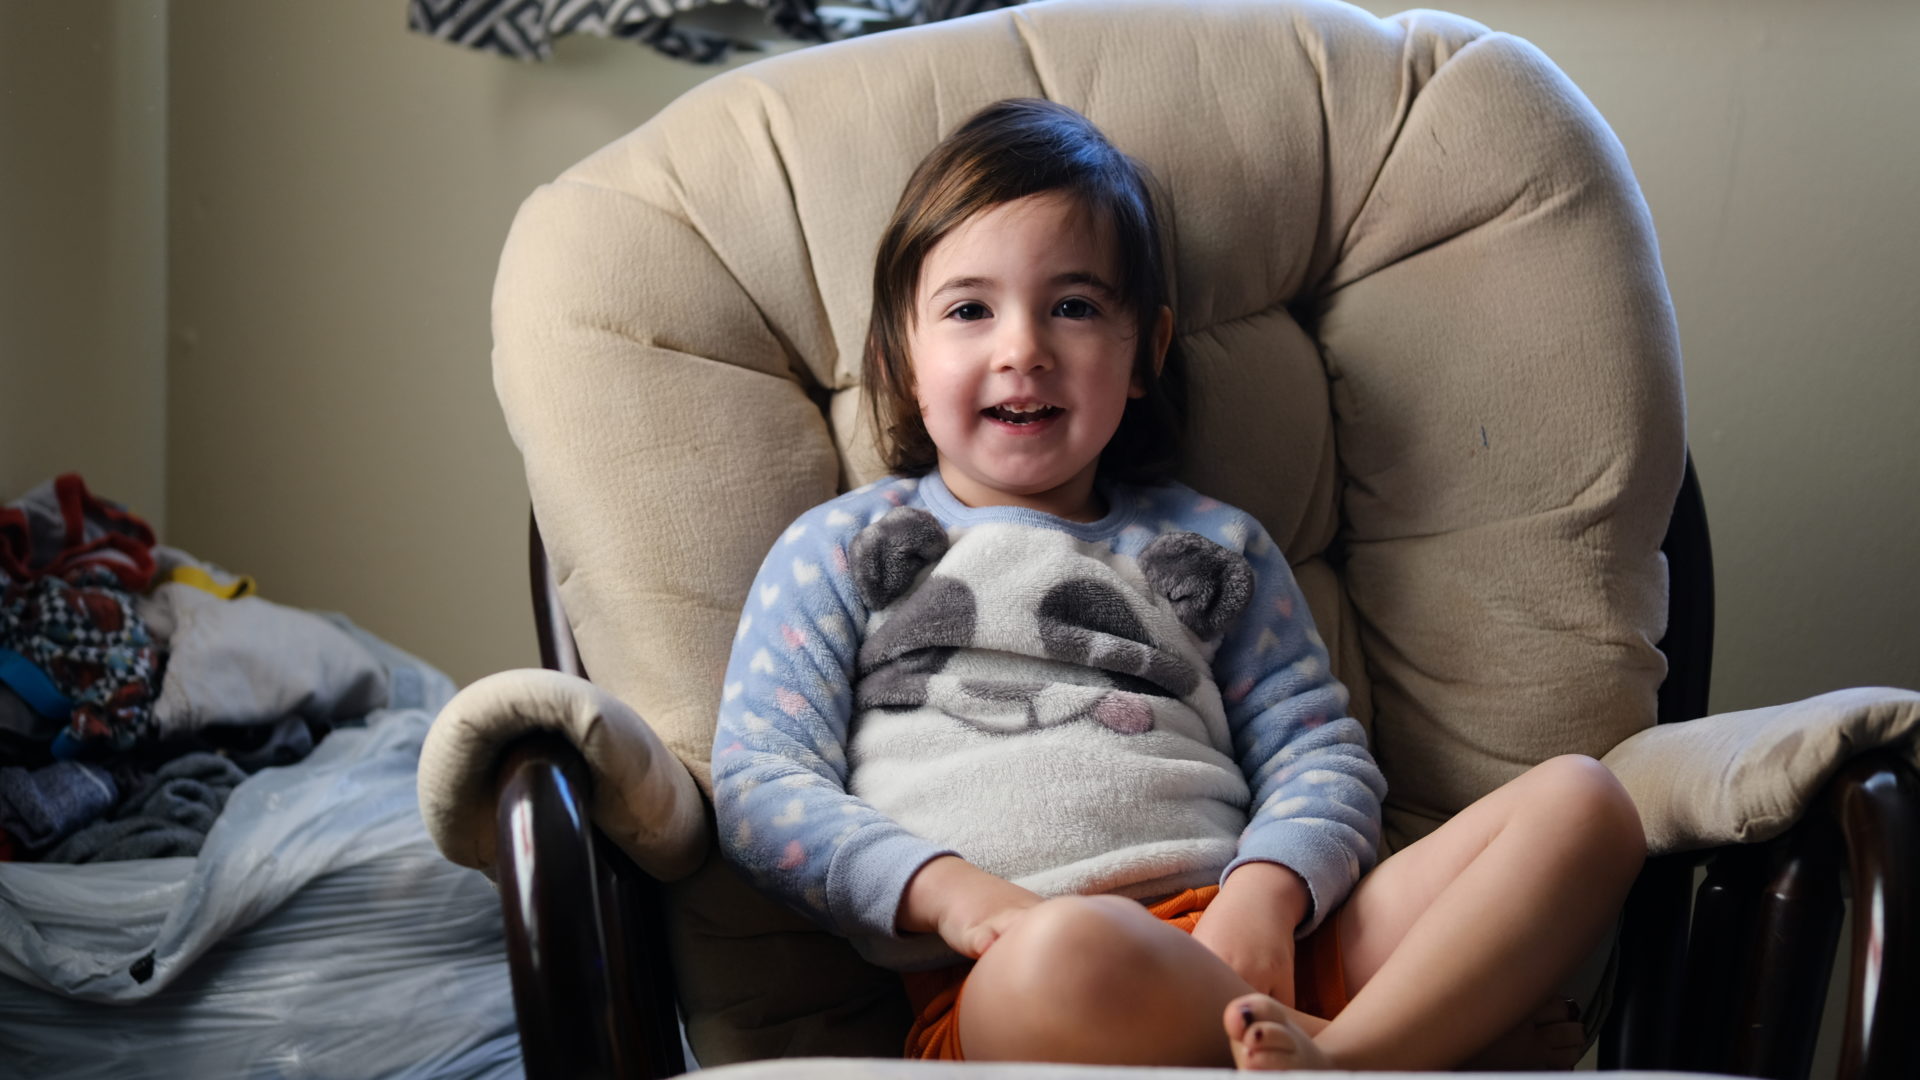 Elle smiles in a rocking chair